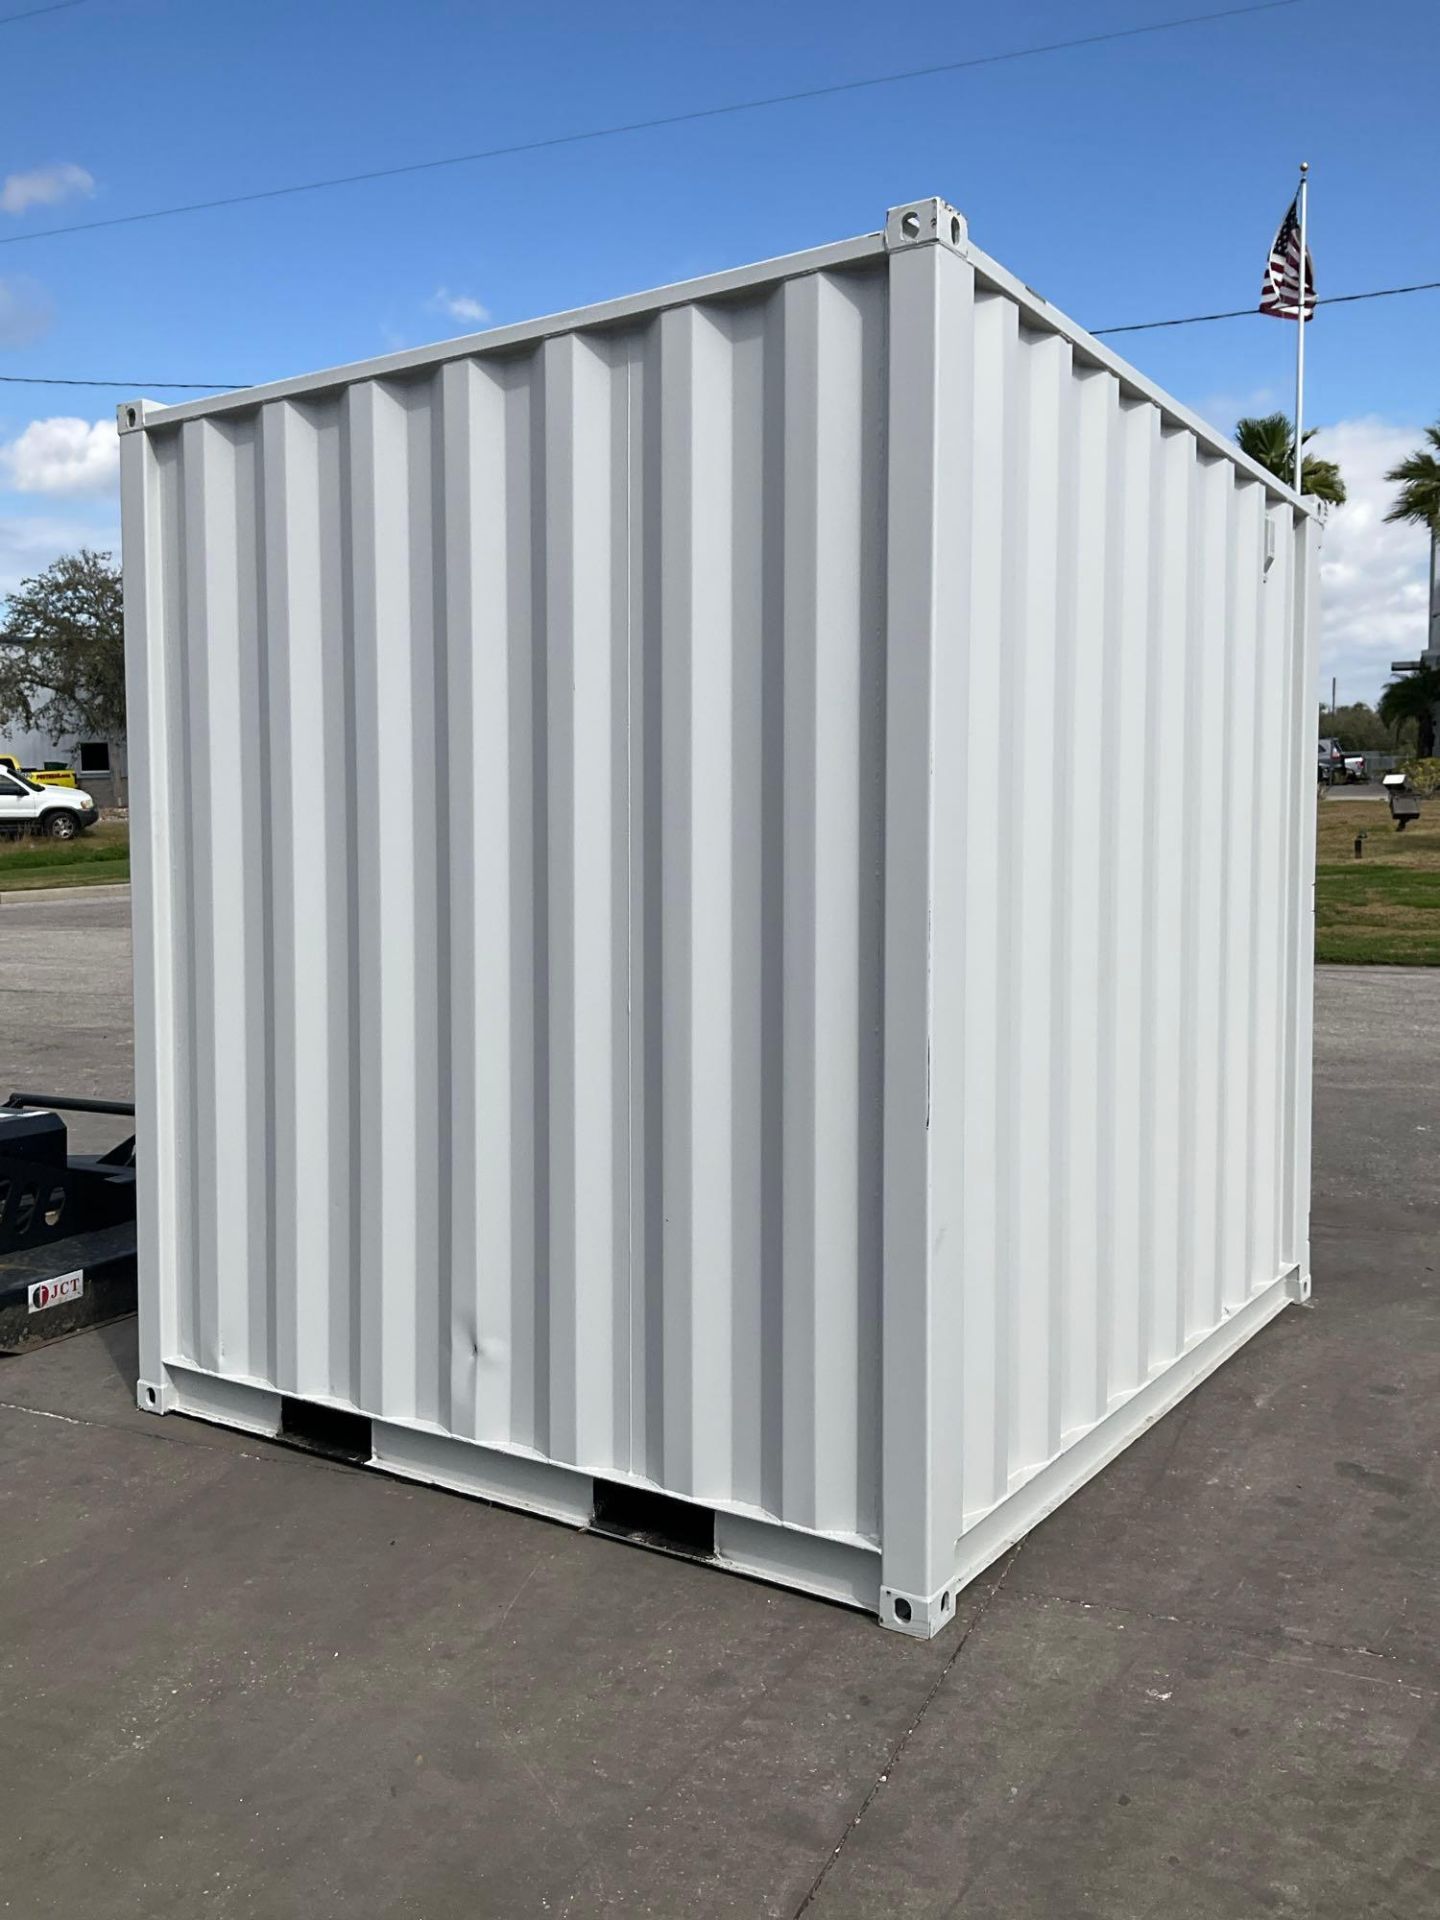 9' OFFICE / STORAGE CONTAINER, FORK POCKETS WITH SIDE DOOR ENTRANCE & SIDE WINDOW, APPROX 99'' T x - Image 7 of 11